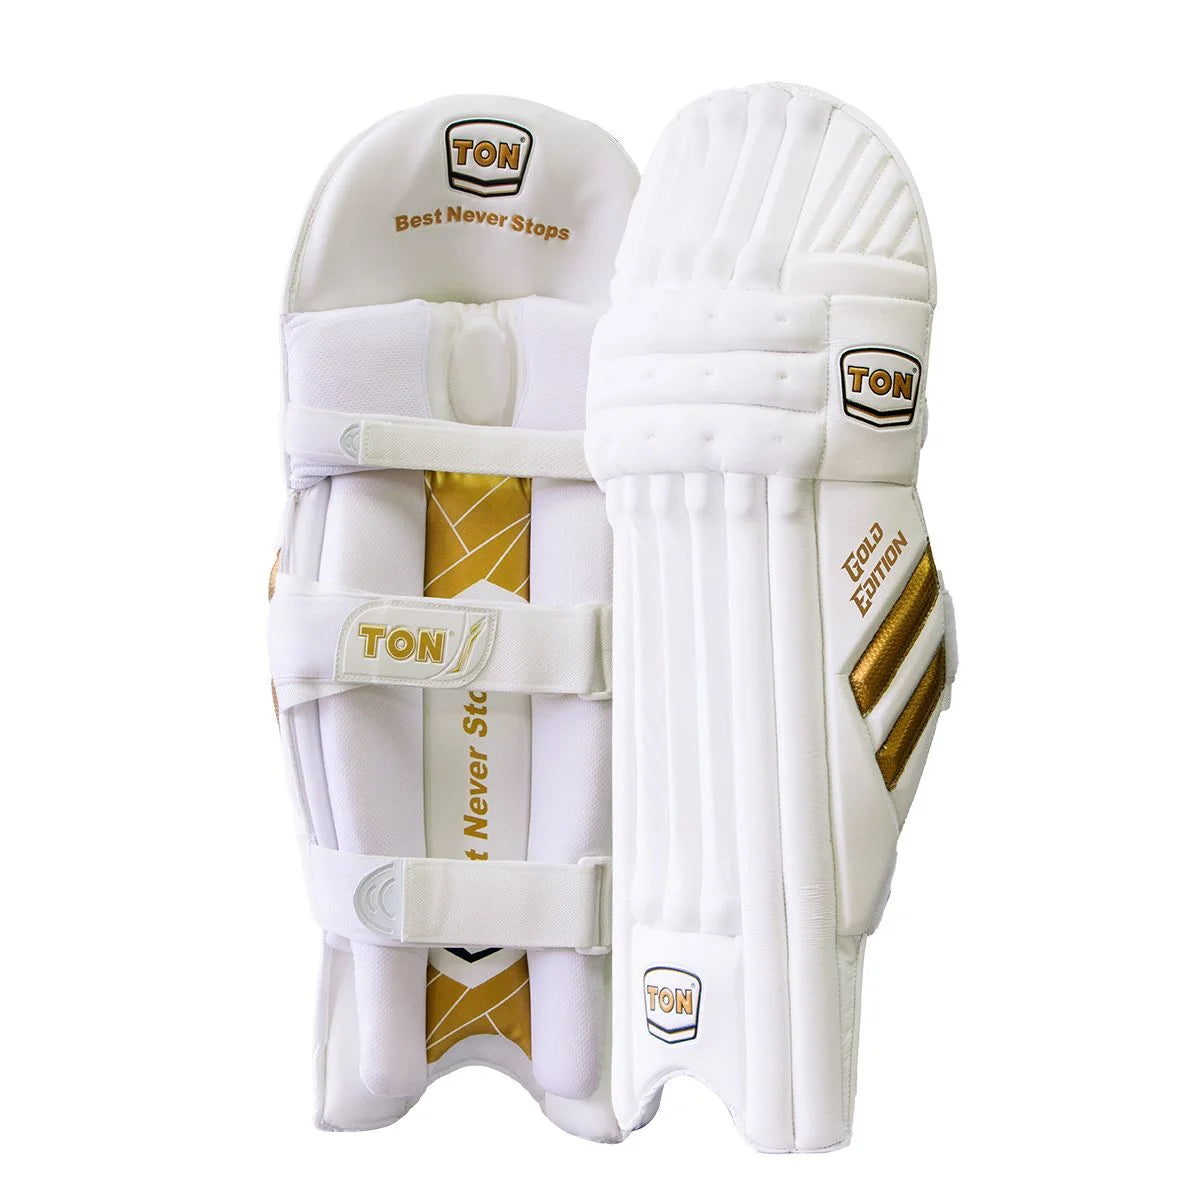 SS Ton Gold Edition Light Weight Cricket Batting Pads Pack of 2